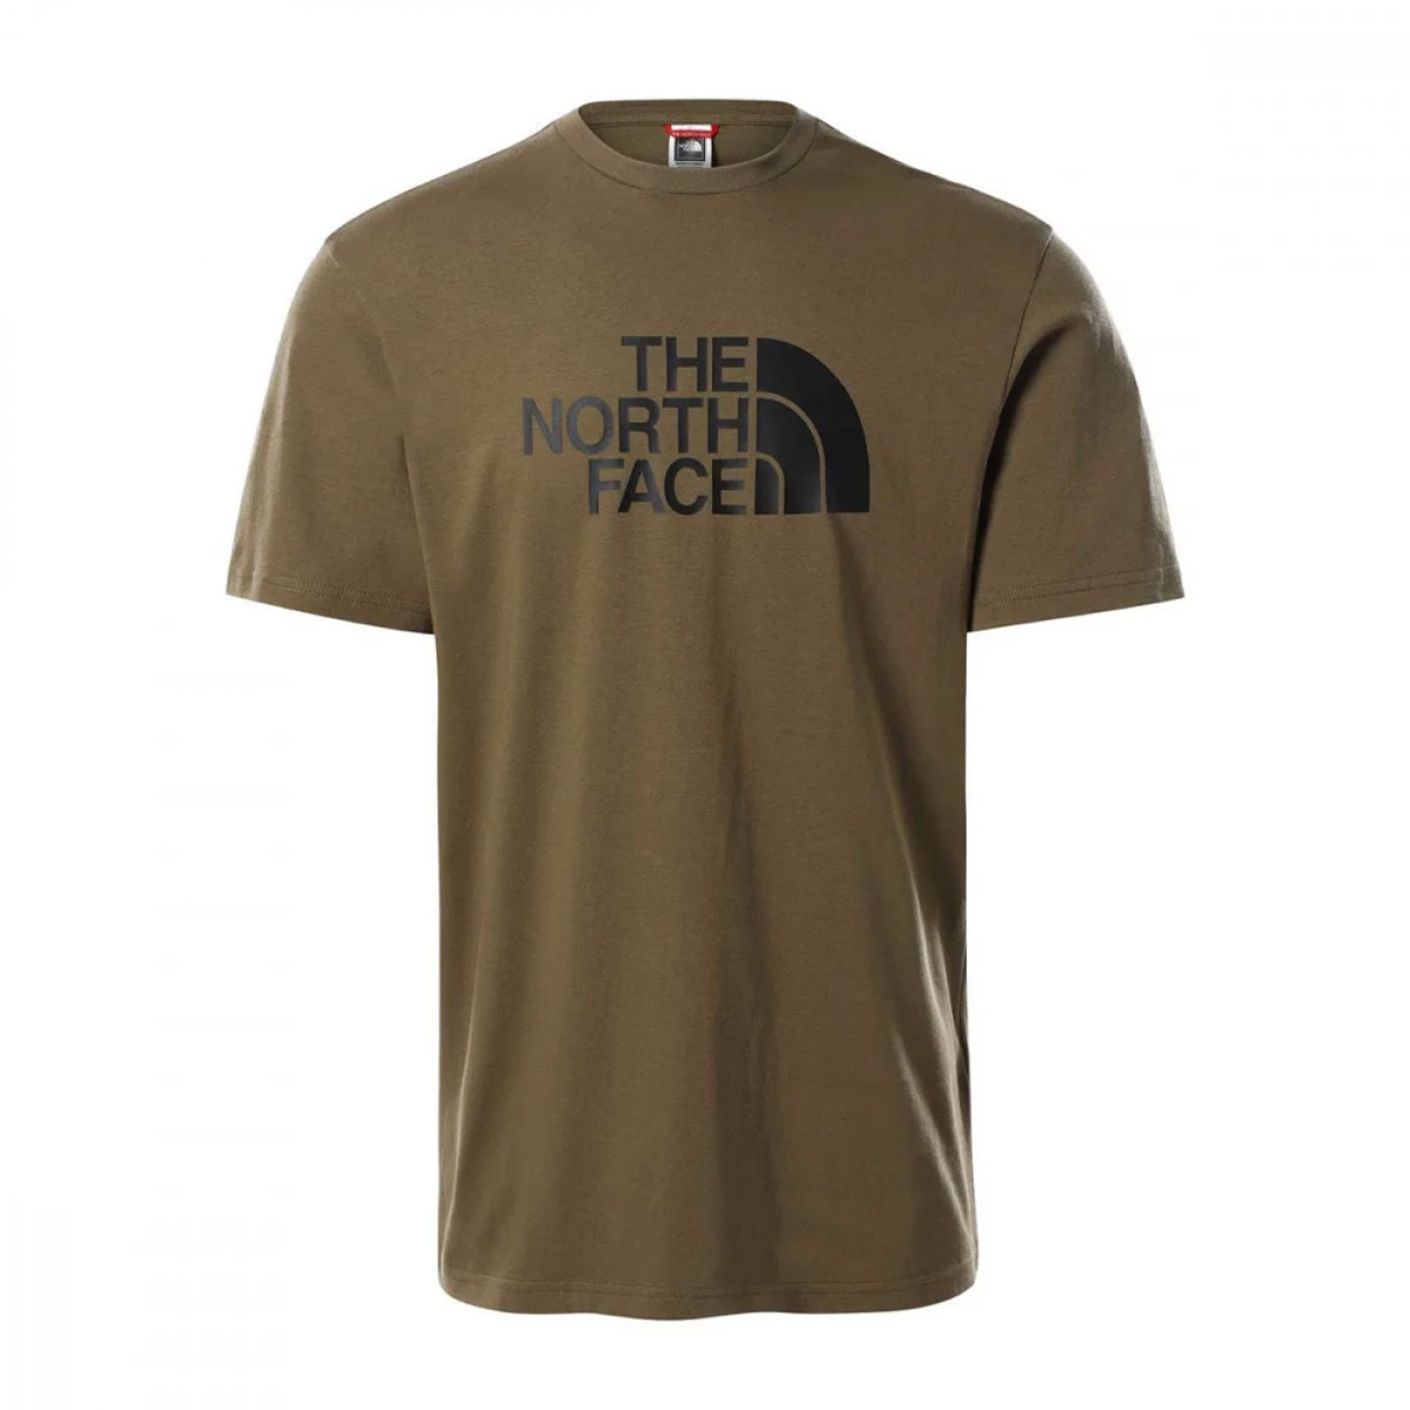 The North Face Easy Tee Military Olive T-shirt